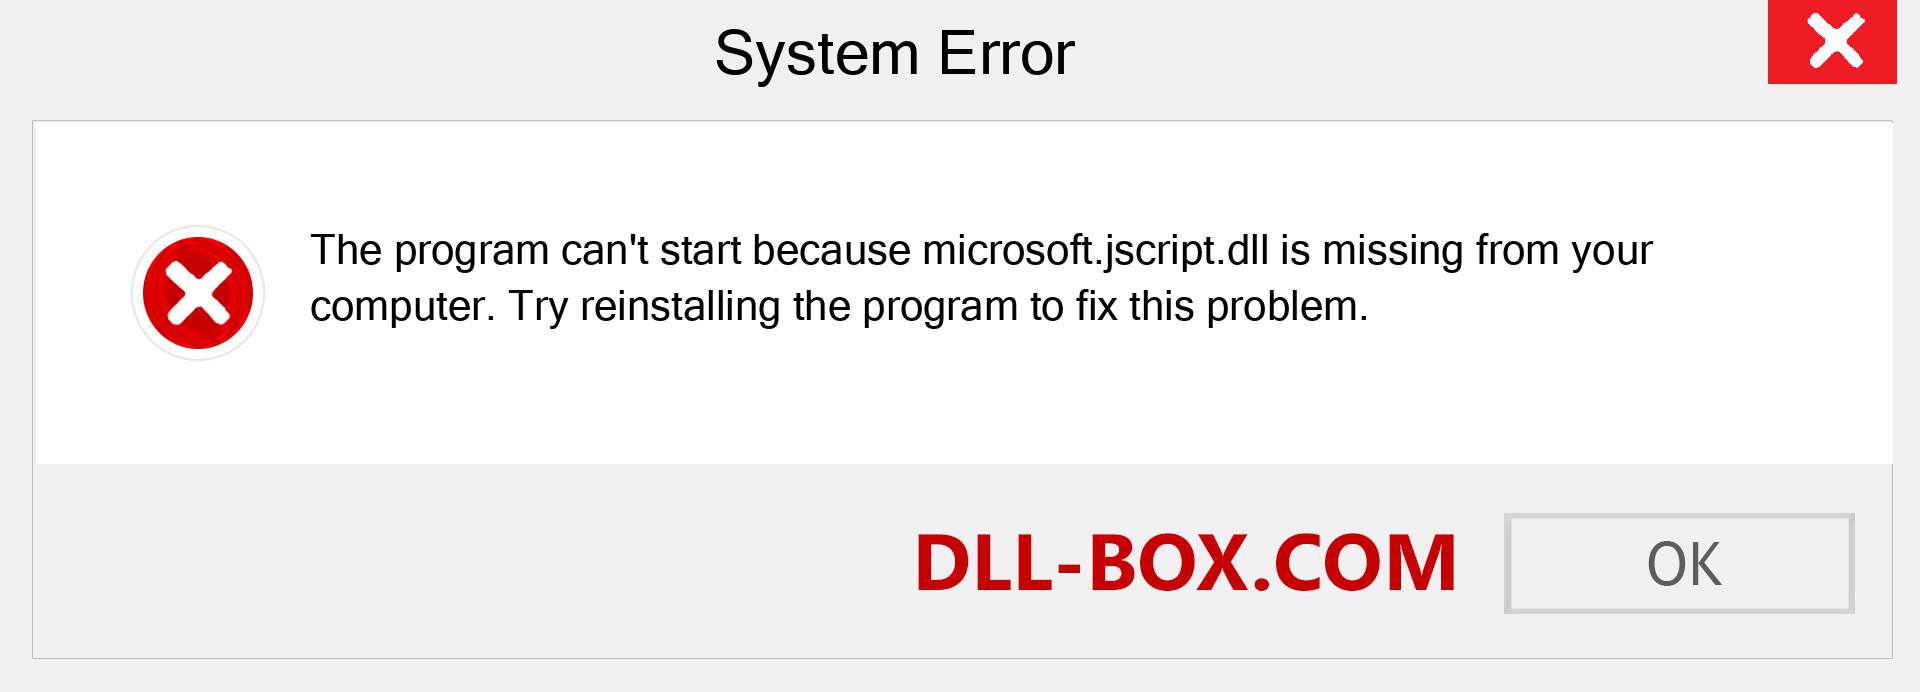  microsoft.jscript.dll file is missing?. Download for Windows 7, 8, 10 - Fix  microsoft.jscript dll Missing Error on Windows, photos, images